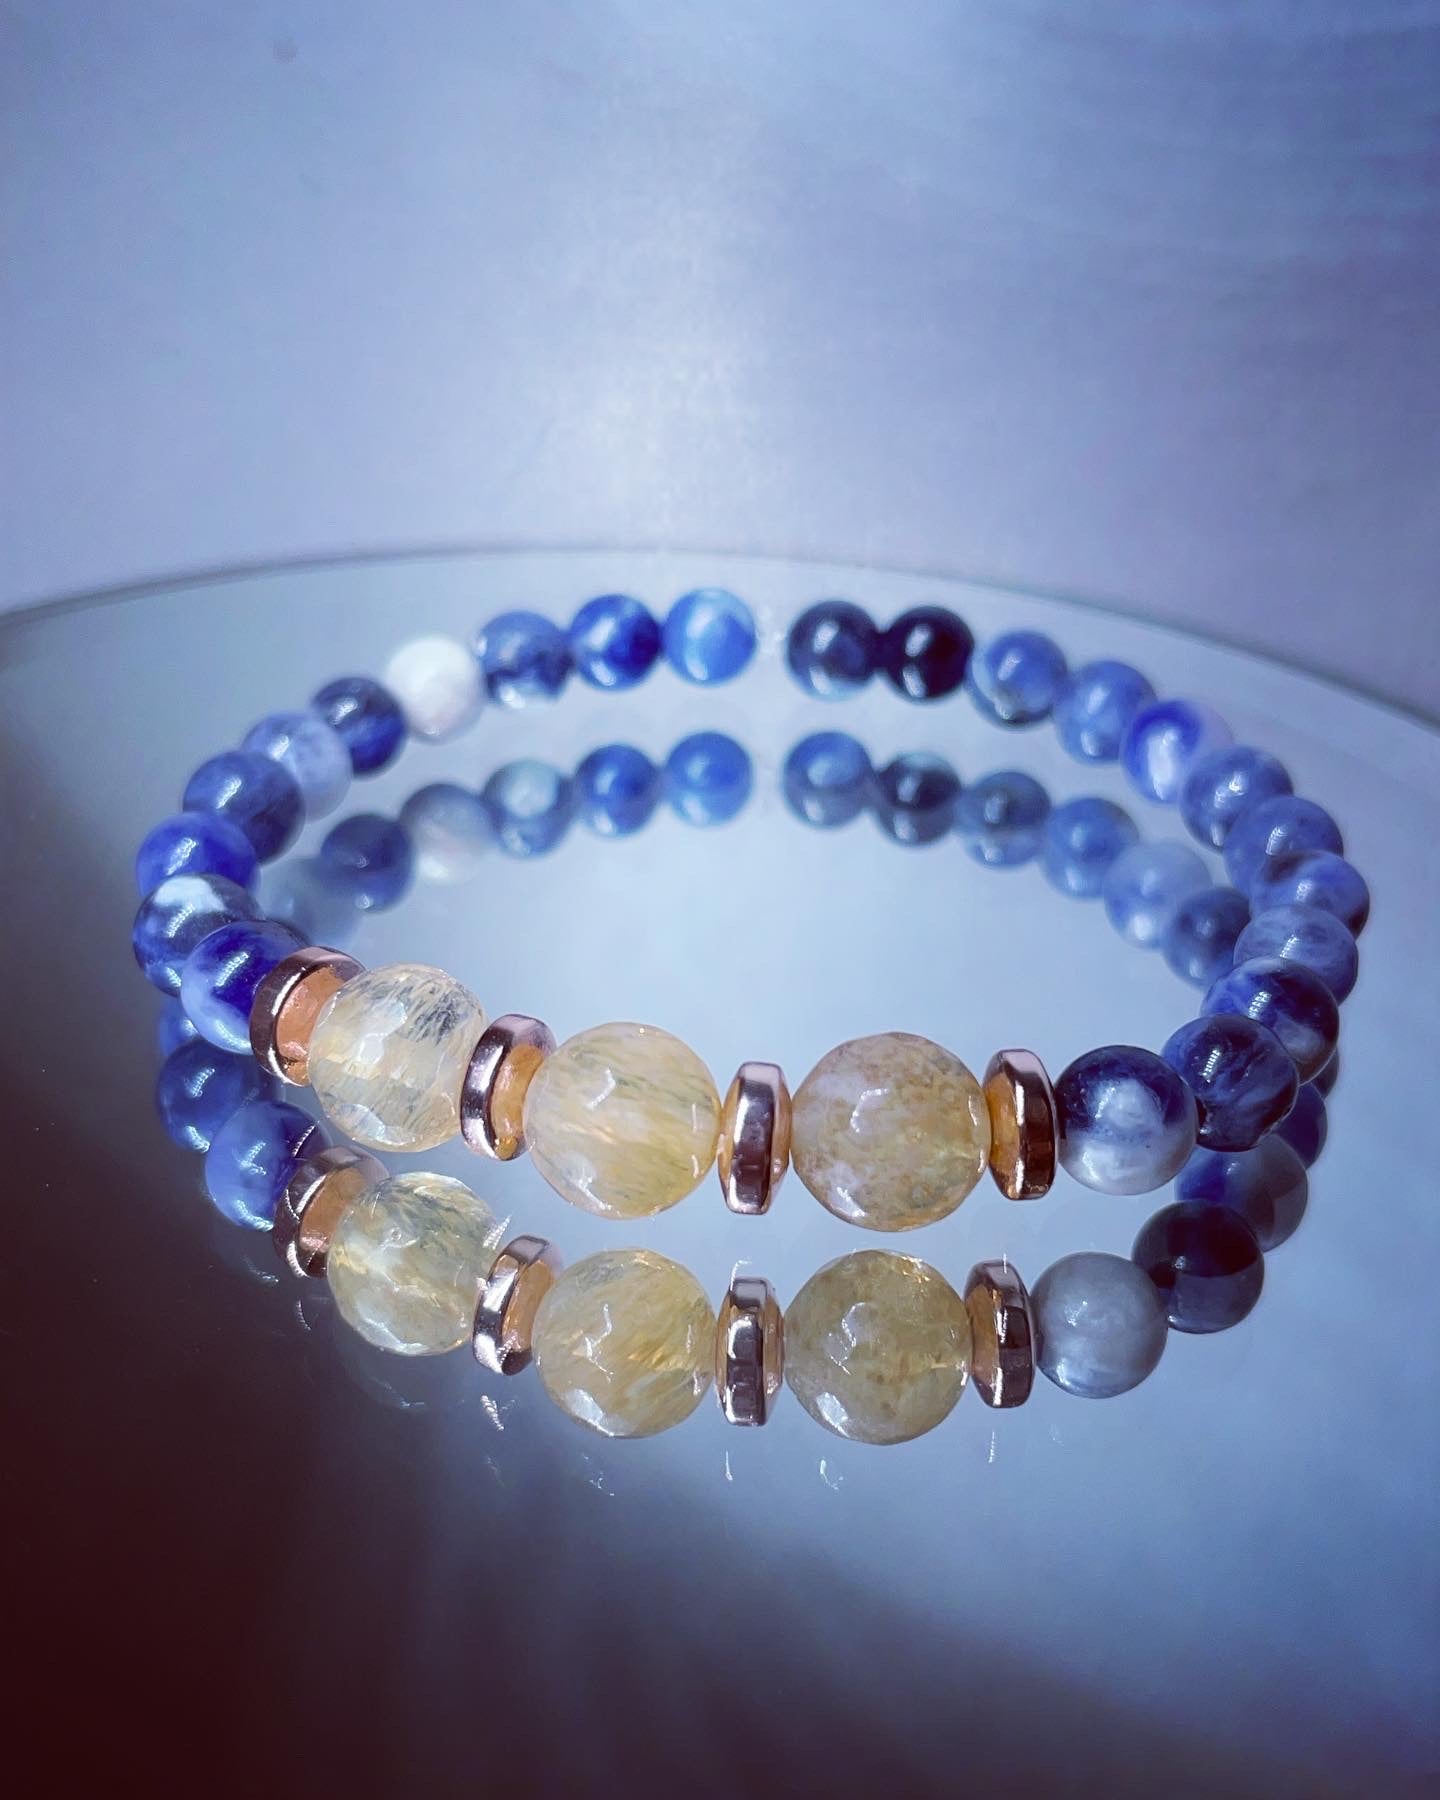 Sodalite and citrine crystal bead bracelet for calm, optimism and positivity